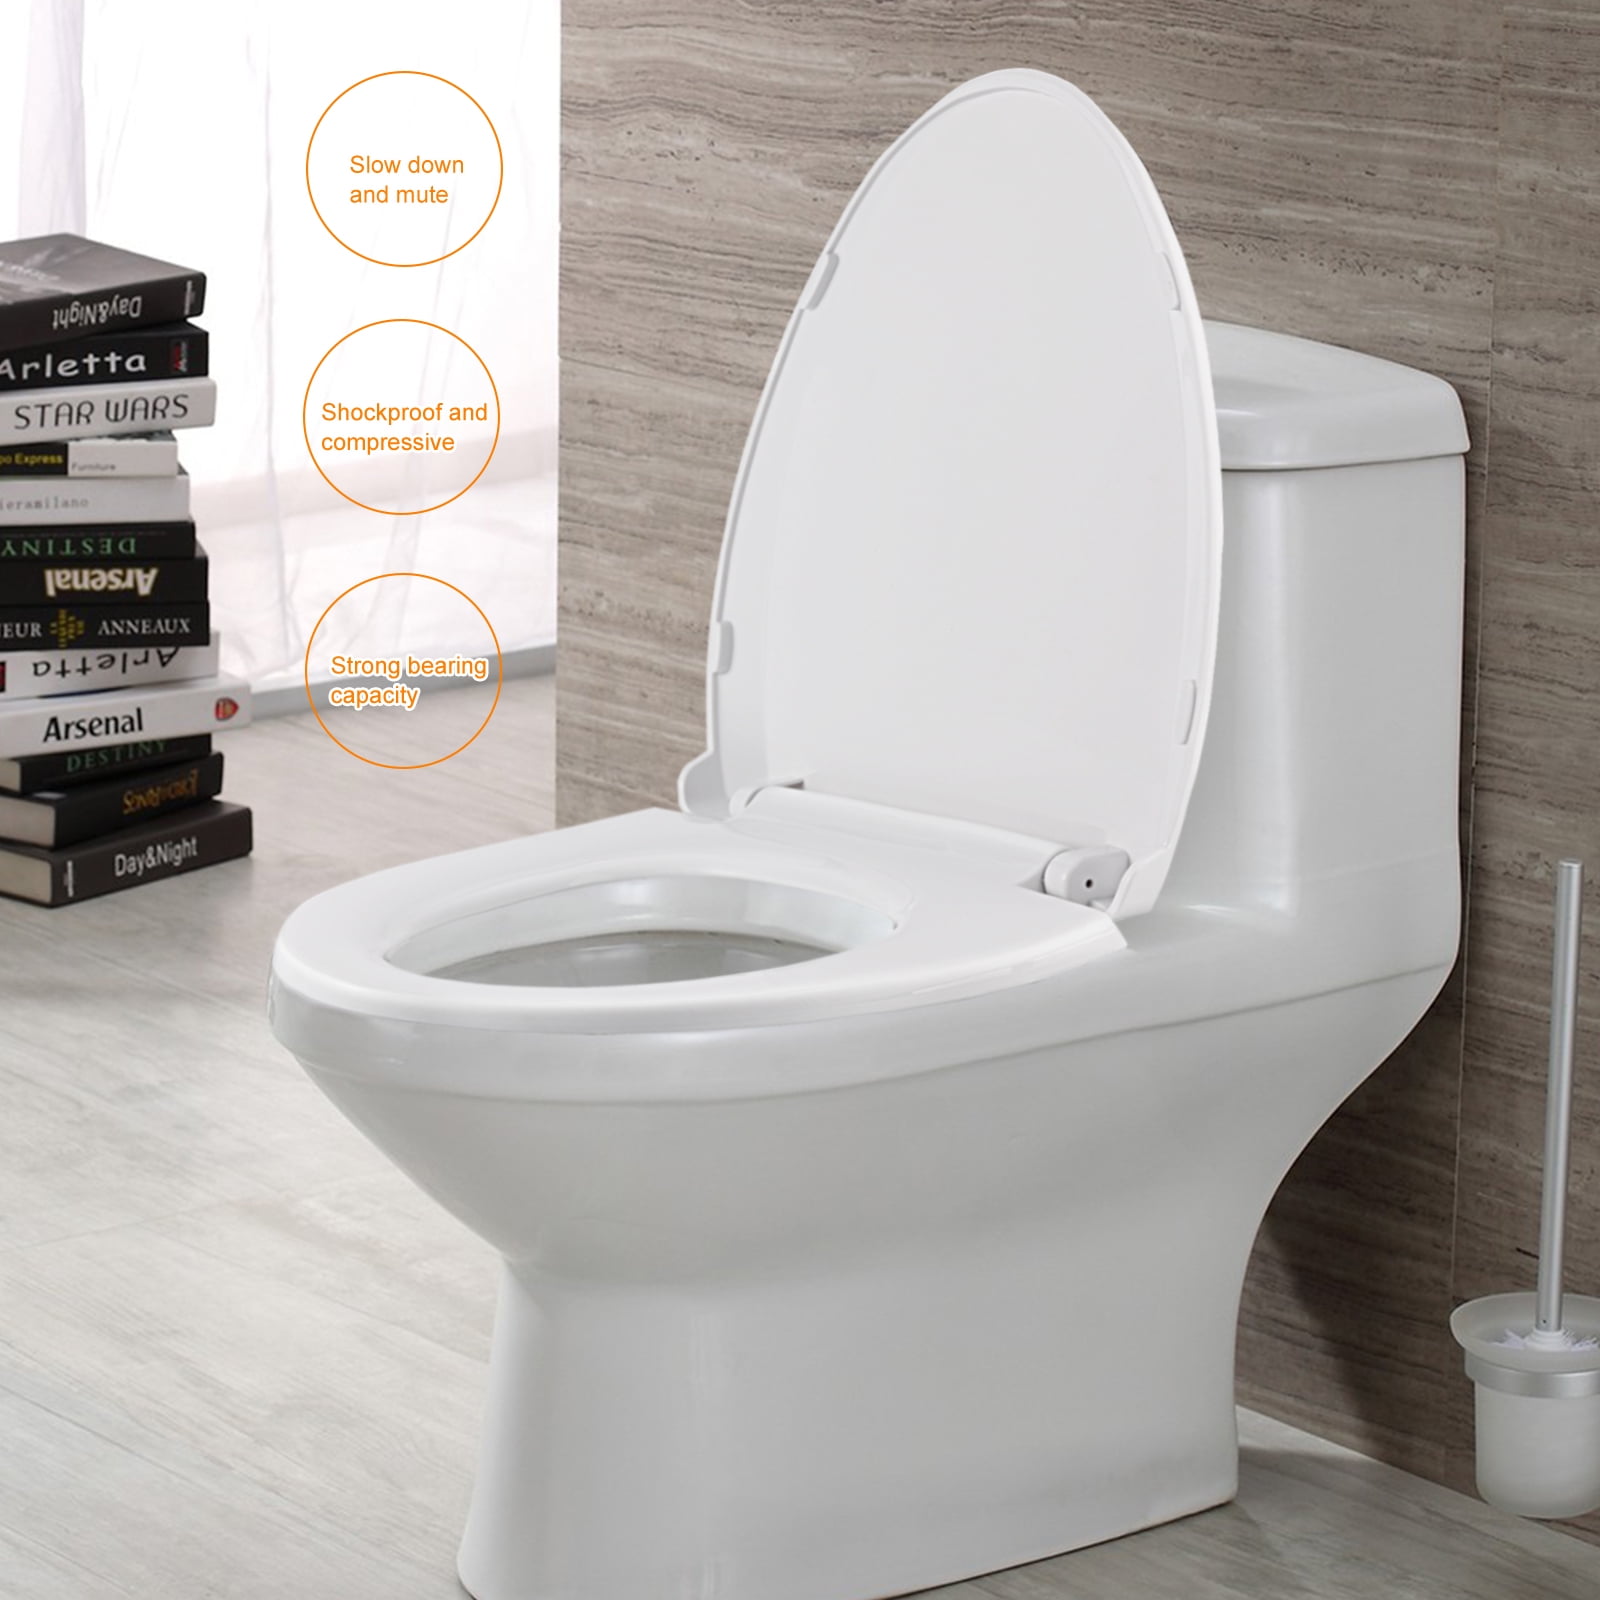 Details about   NEW Modern Heavy Duty Toilet Seat Cover V-Shaped Slow Close Easy Clean & Install 